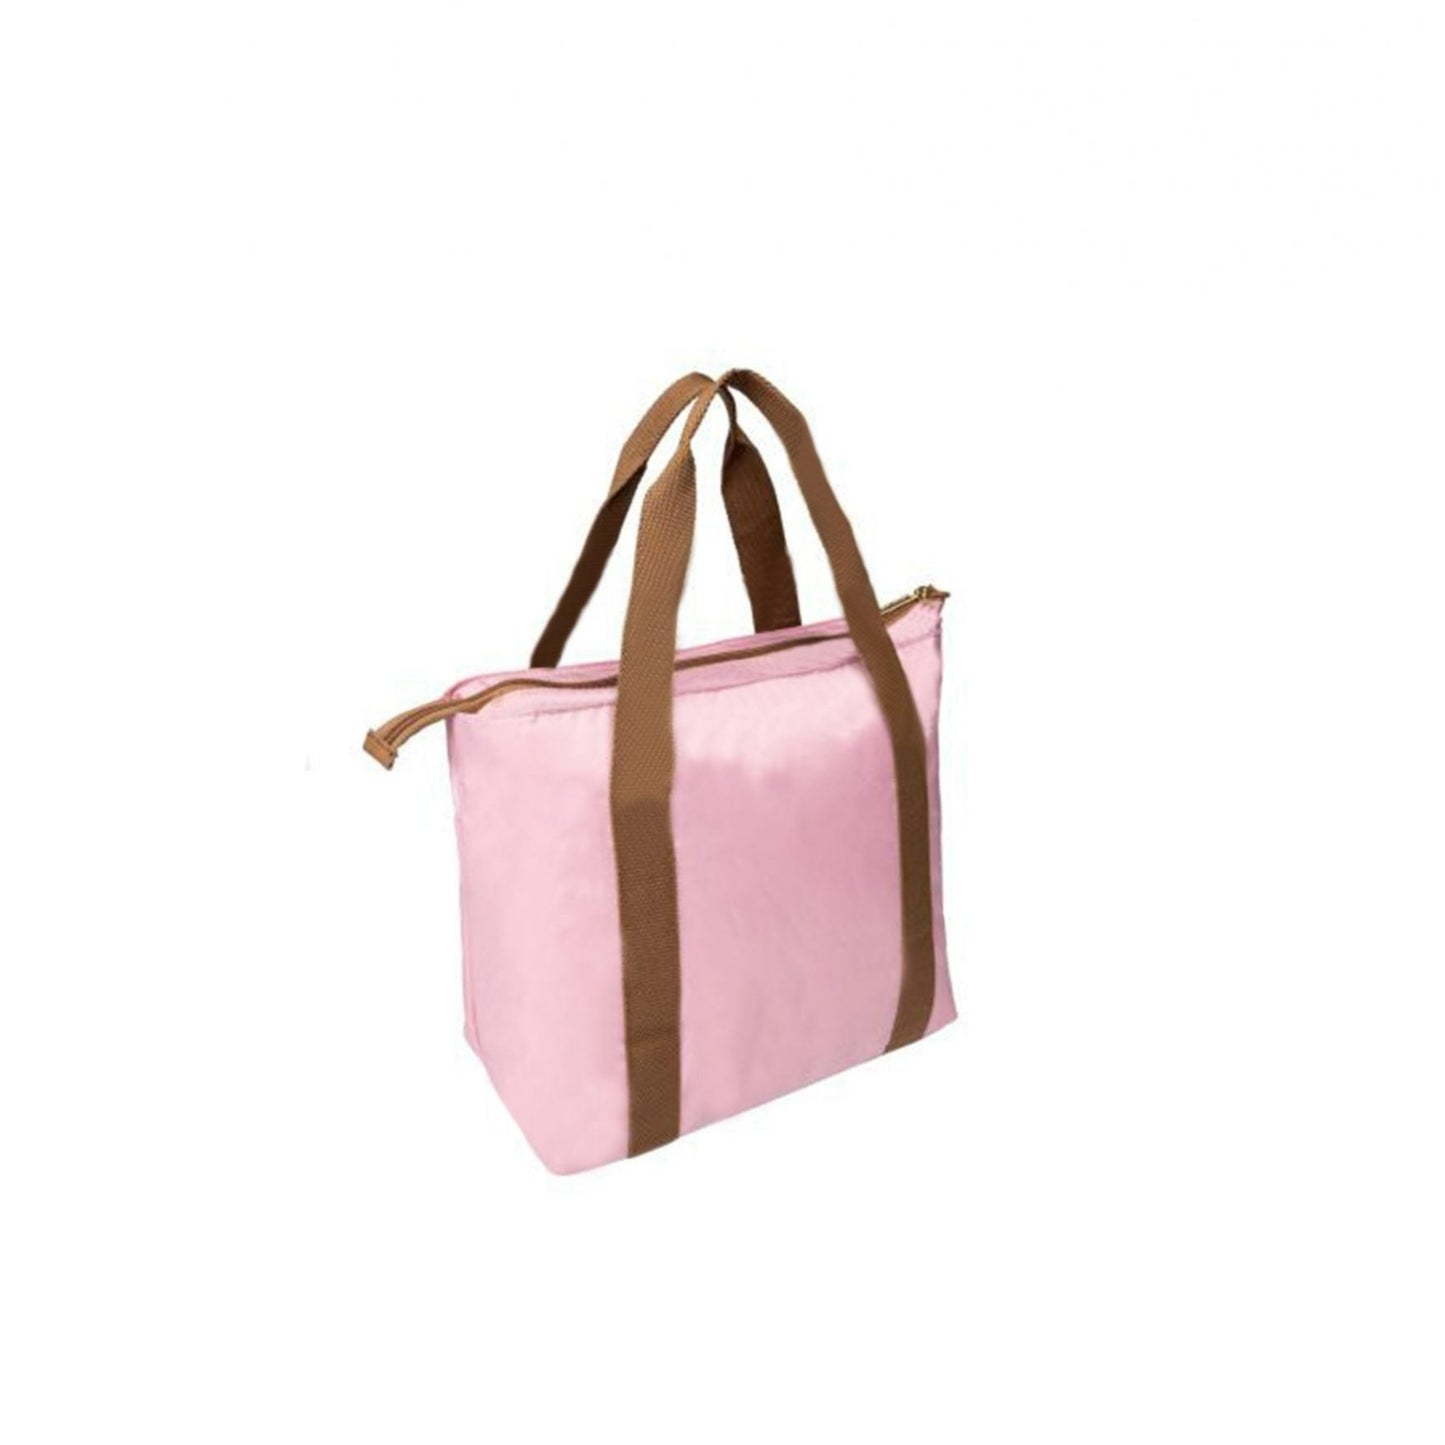 Isaac Mizrahi Vesey Large Lunch Tote